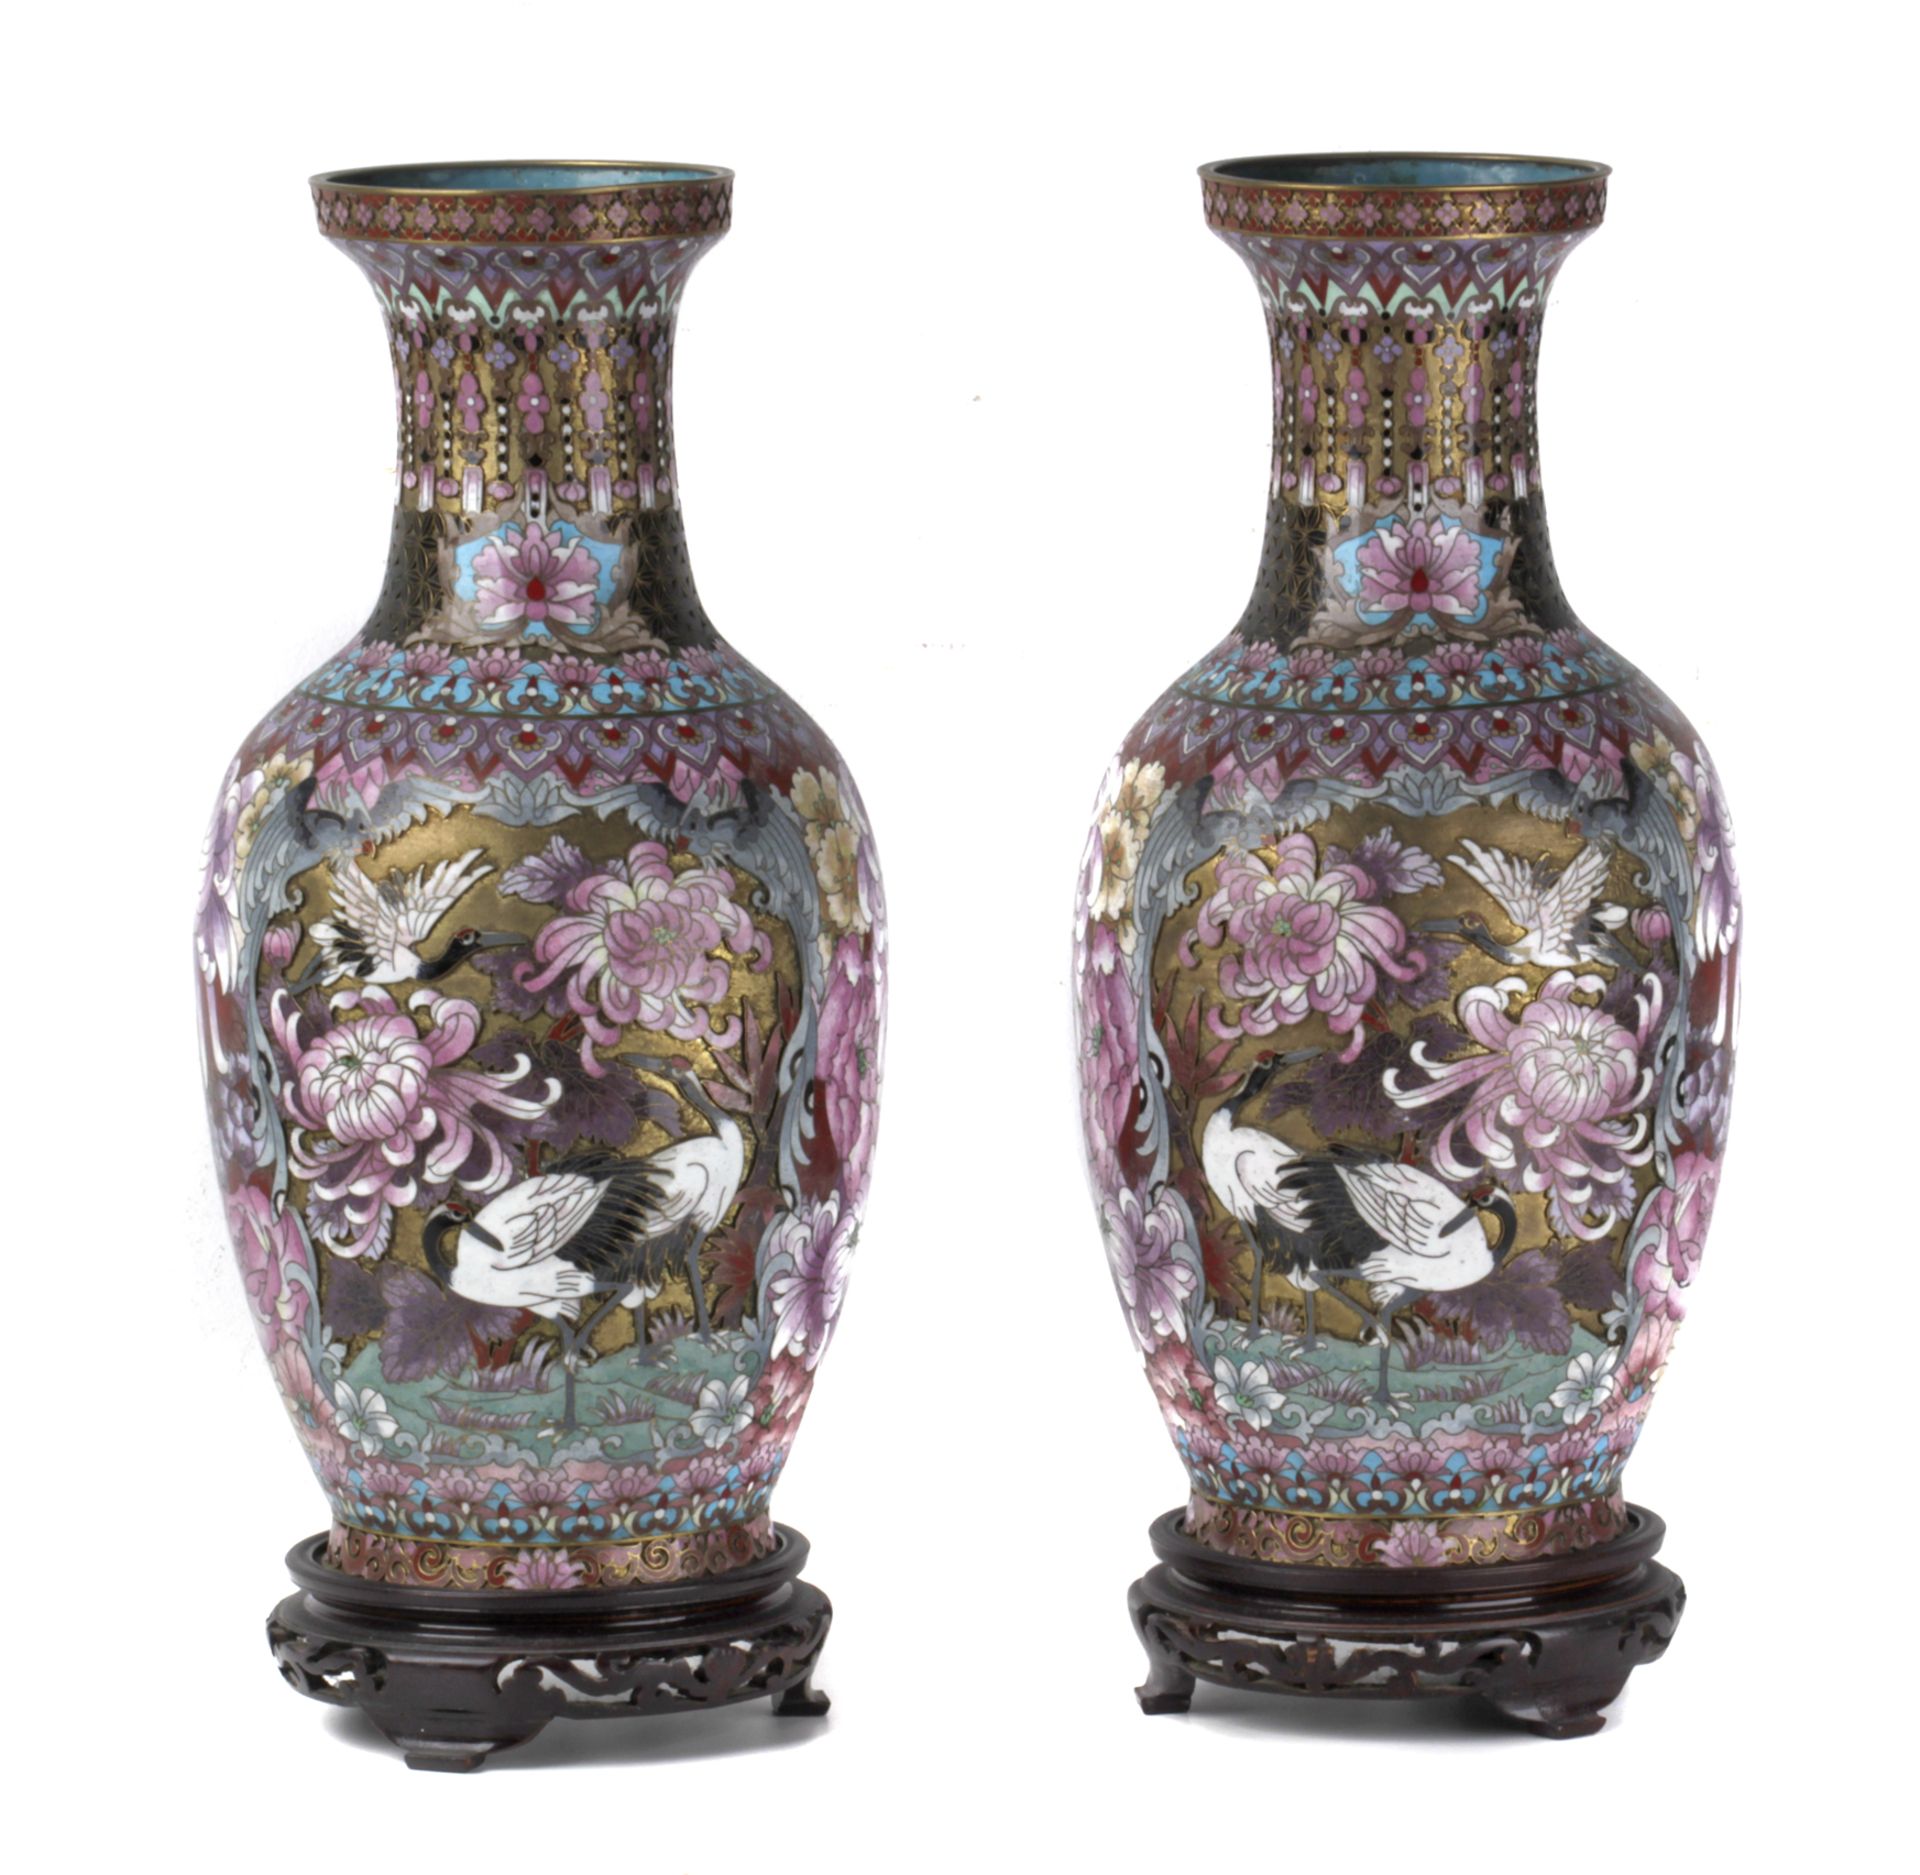 A pair of 20th century Chinese vases in bronze and cloisonné enamel